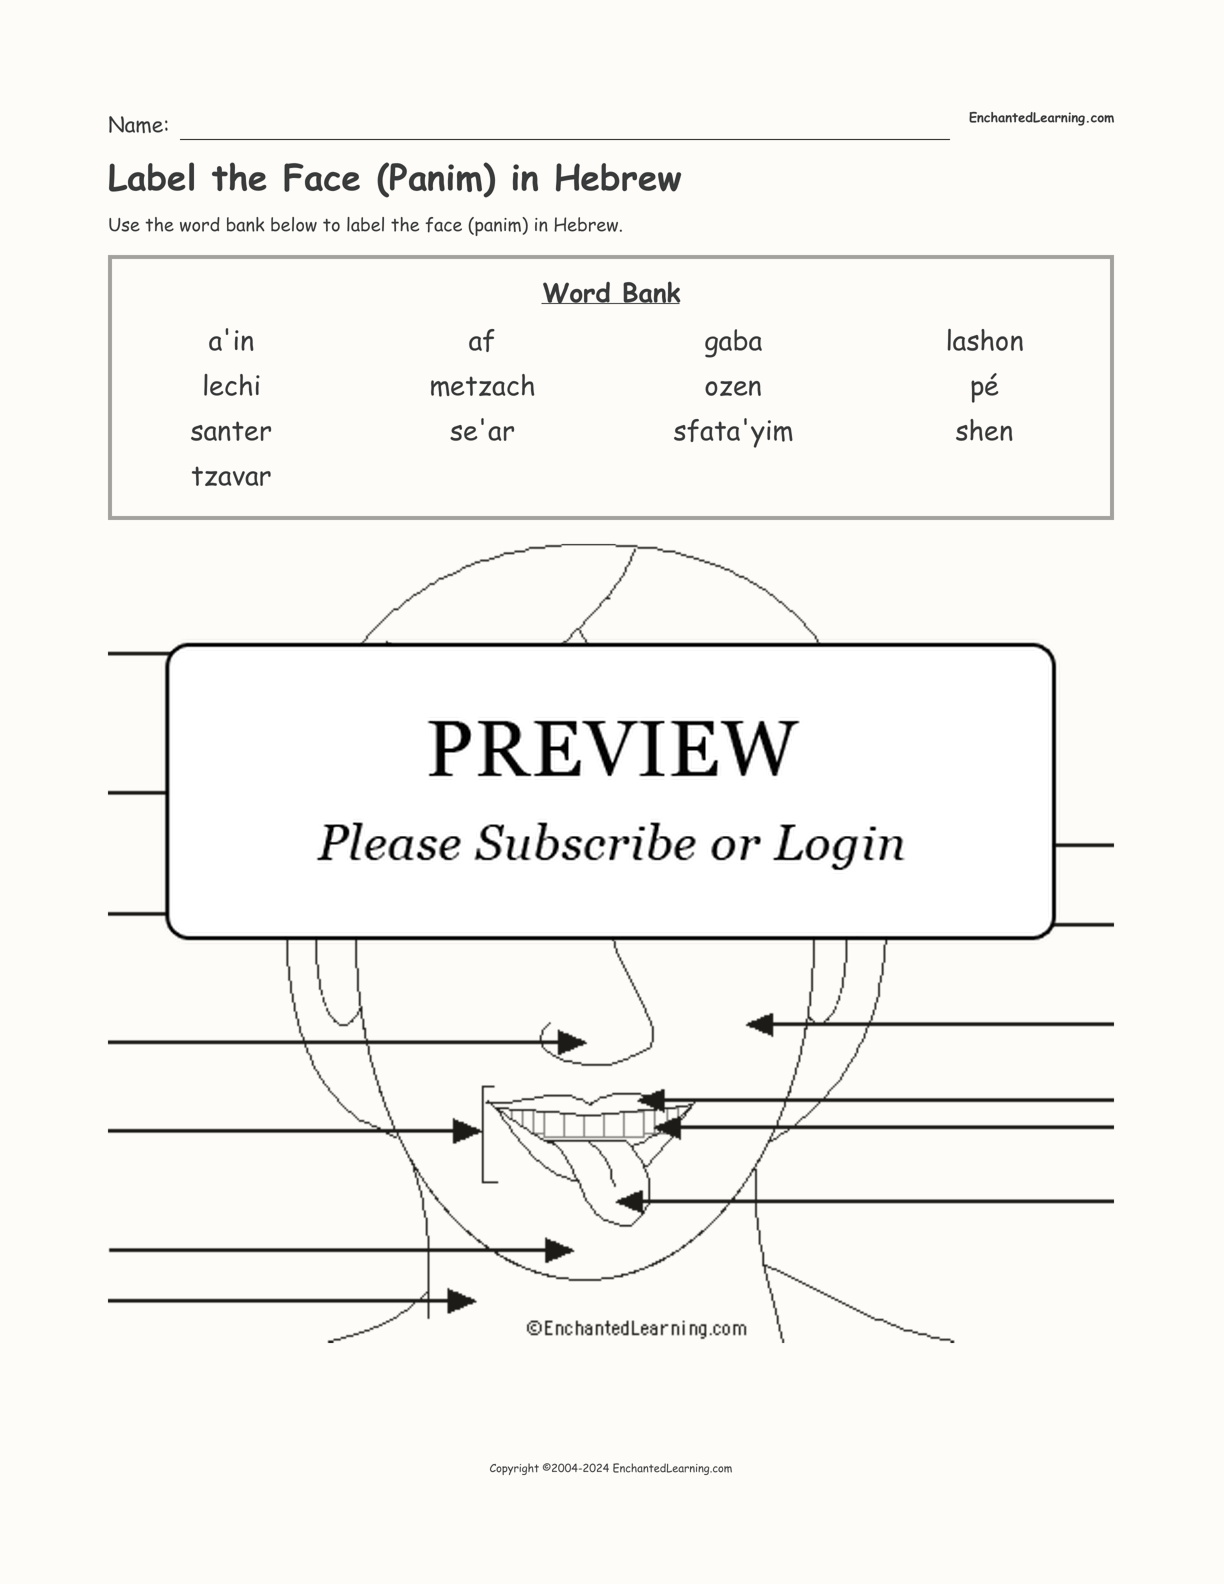 Label the Face (Panim) in Hebrew interactive worksheet page 1